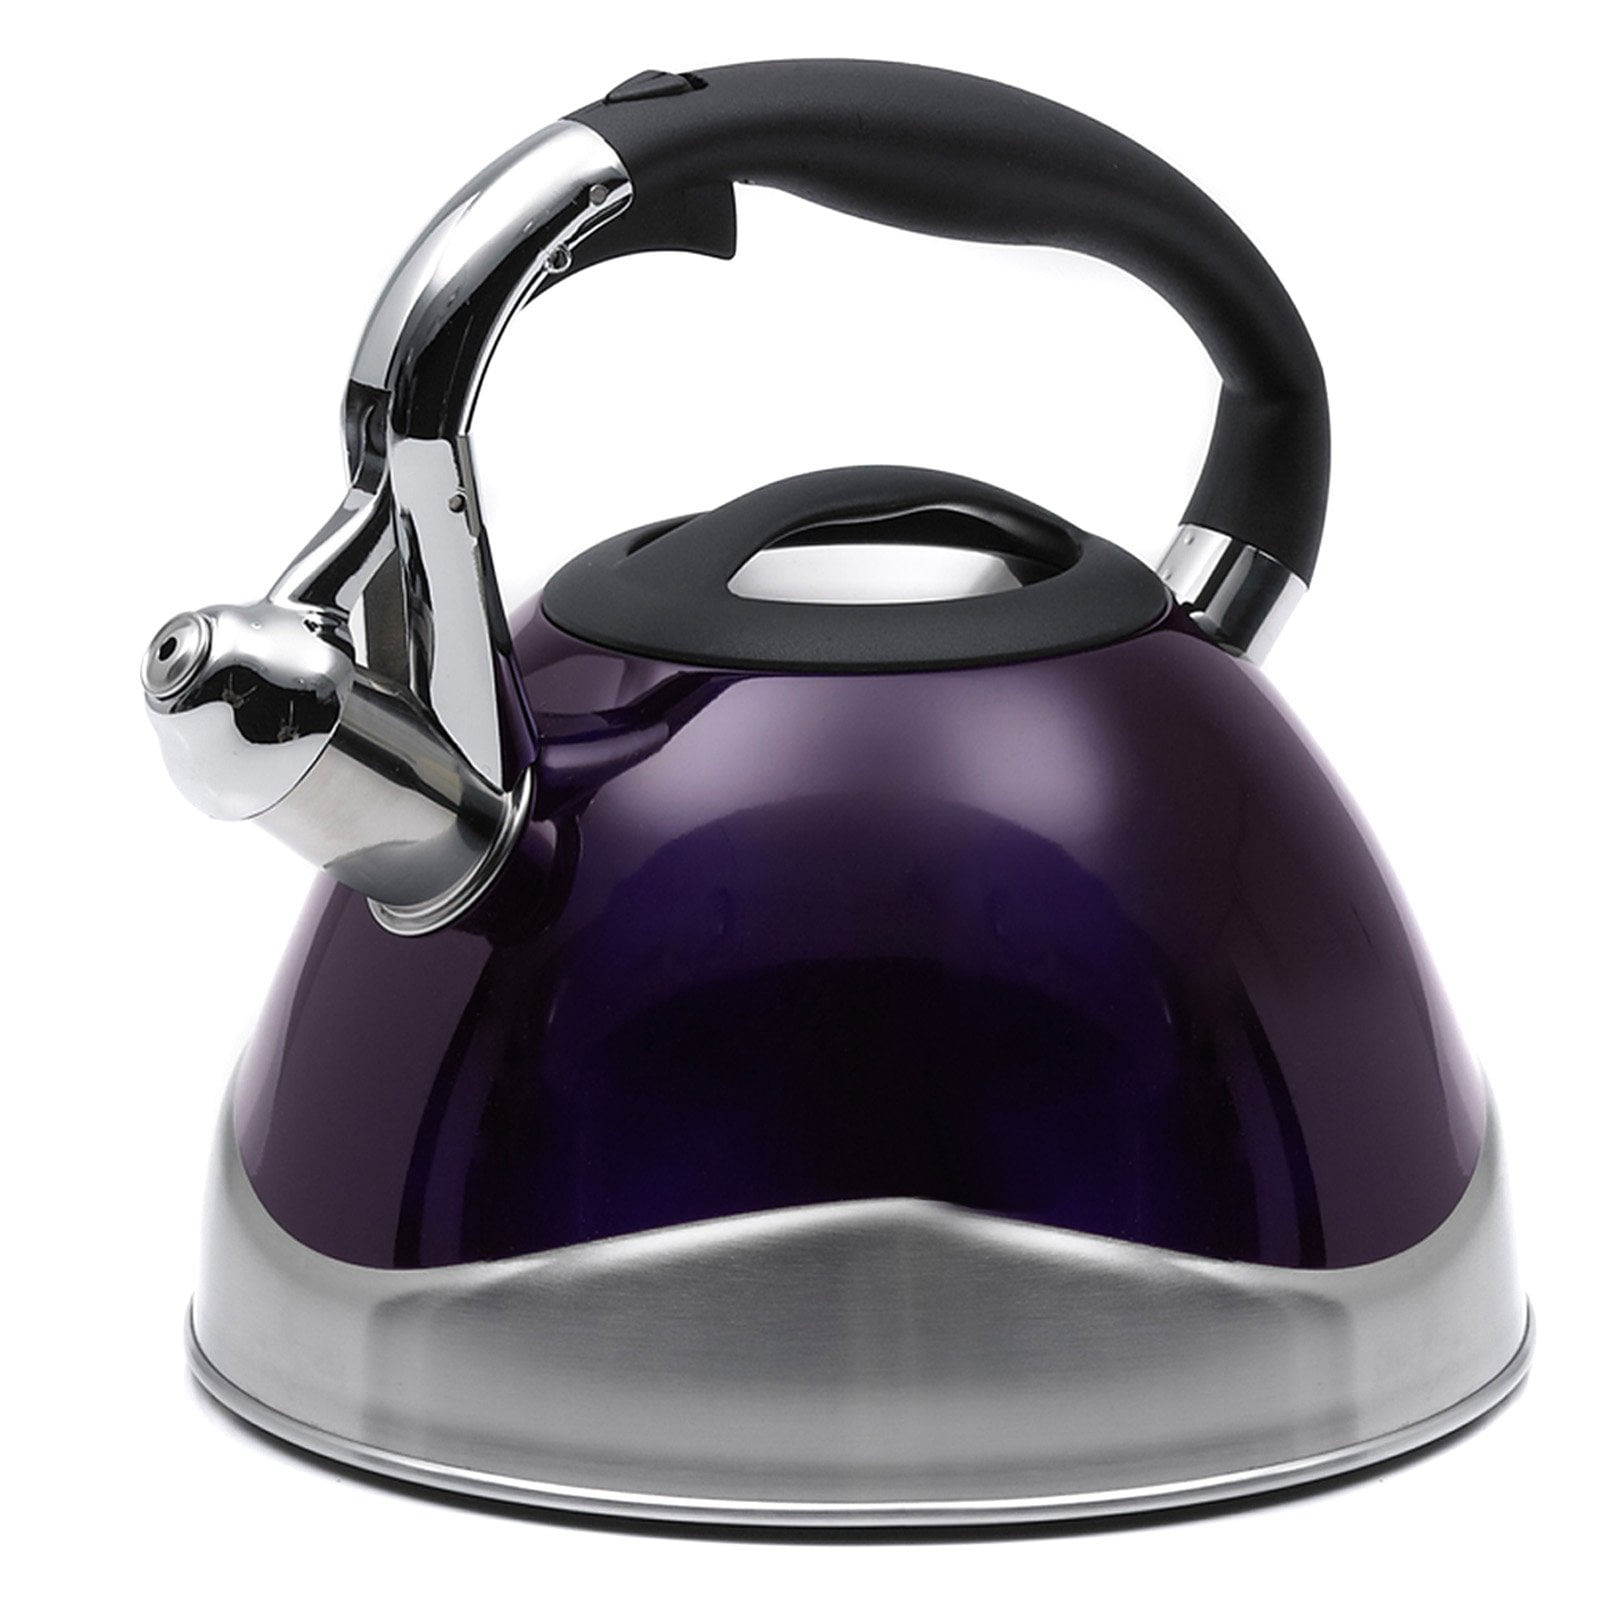 NEW PURPLE 3.5L STAIINLESS STEEL LIGHTWEIGHT WHISTLING KETTLE CAMPING CORDLESS